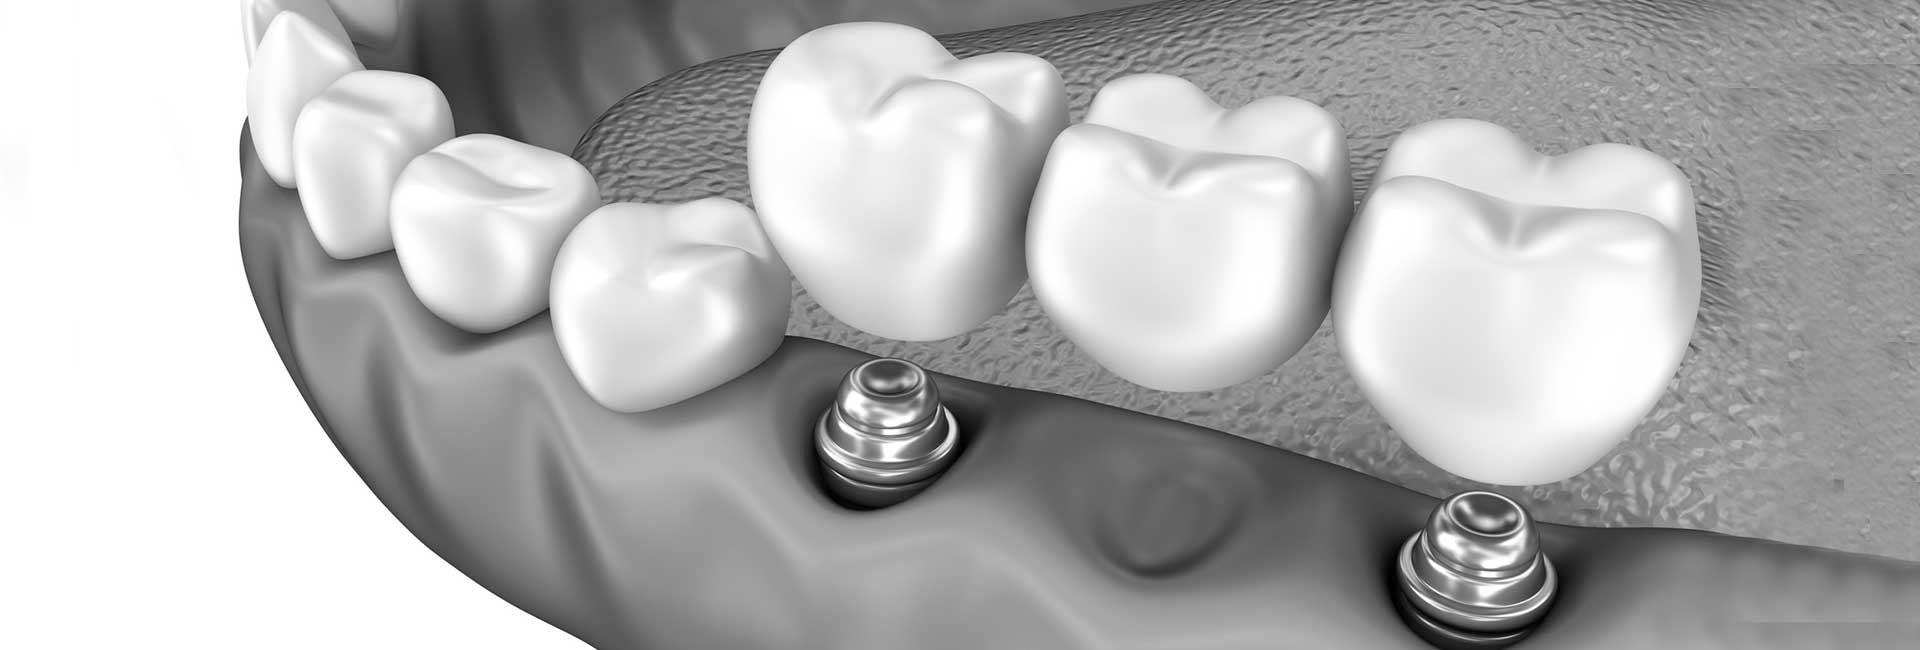 Dental bridge supported by implants - Signature Smiles Dental